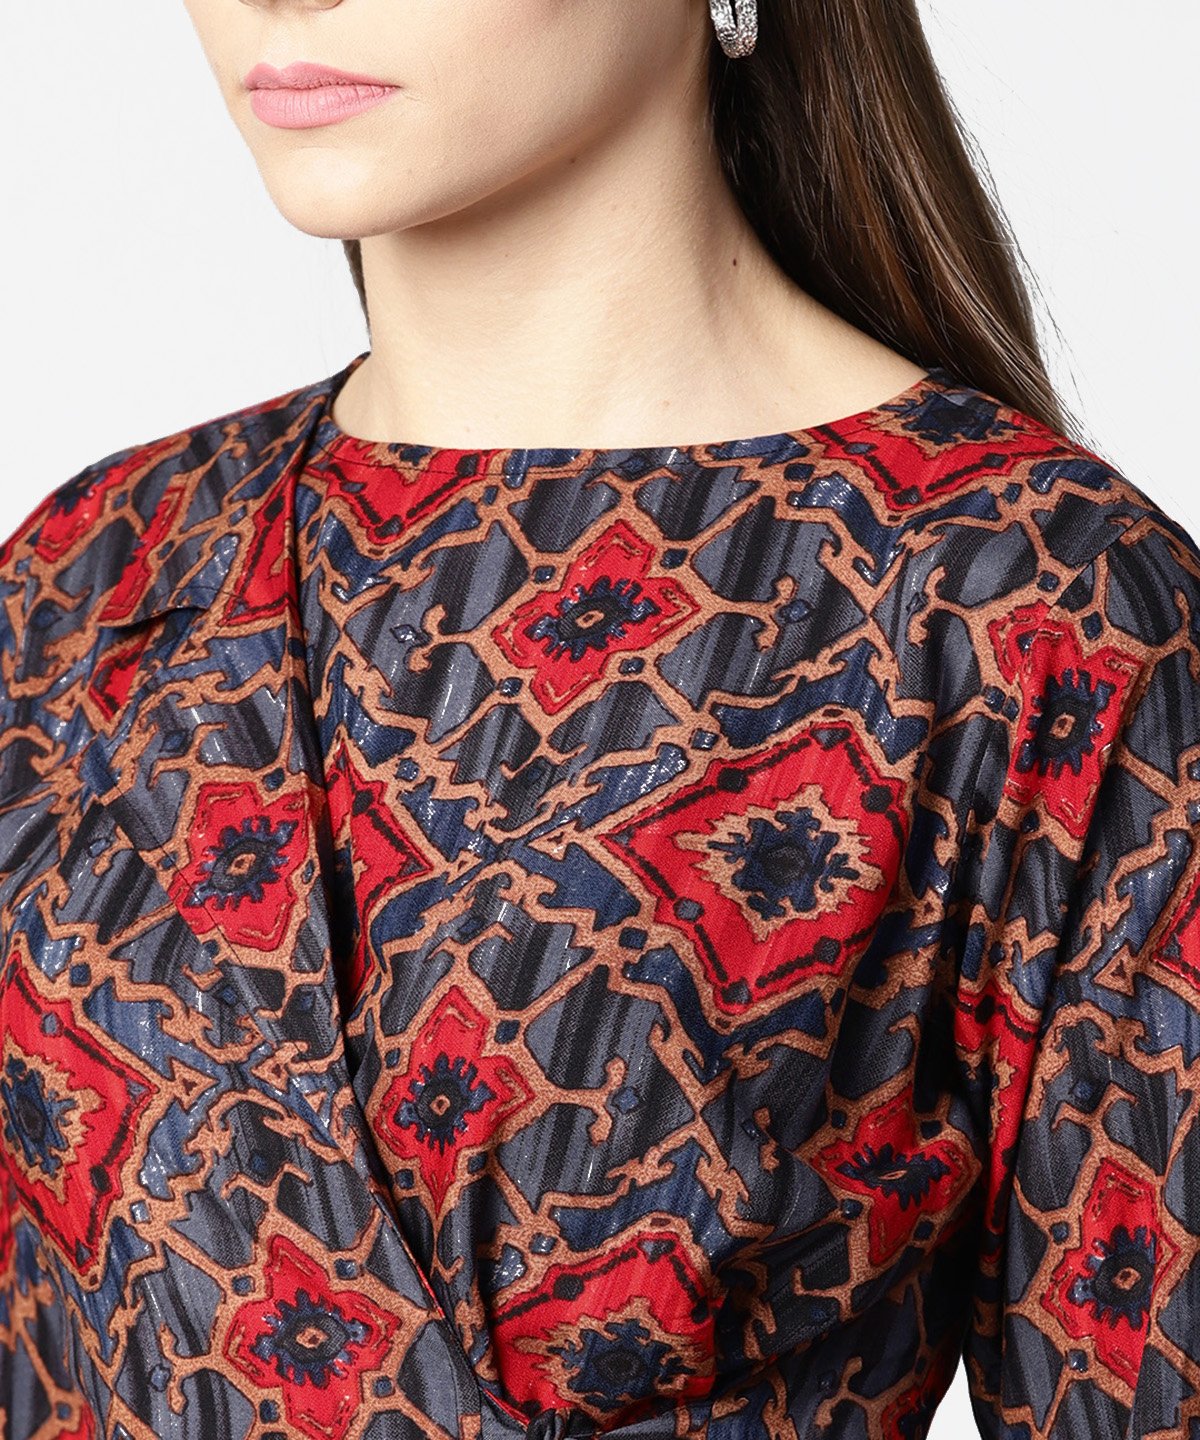 Women's Blue & Red Printed Full Sleeve Tops - Nayo Clothing